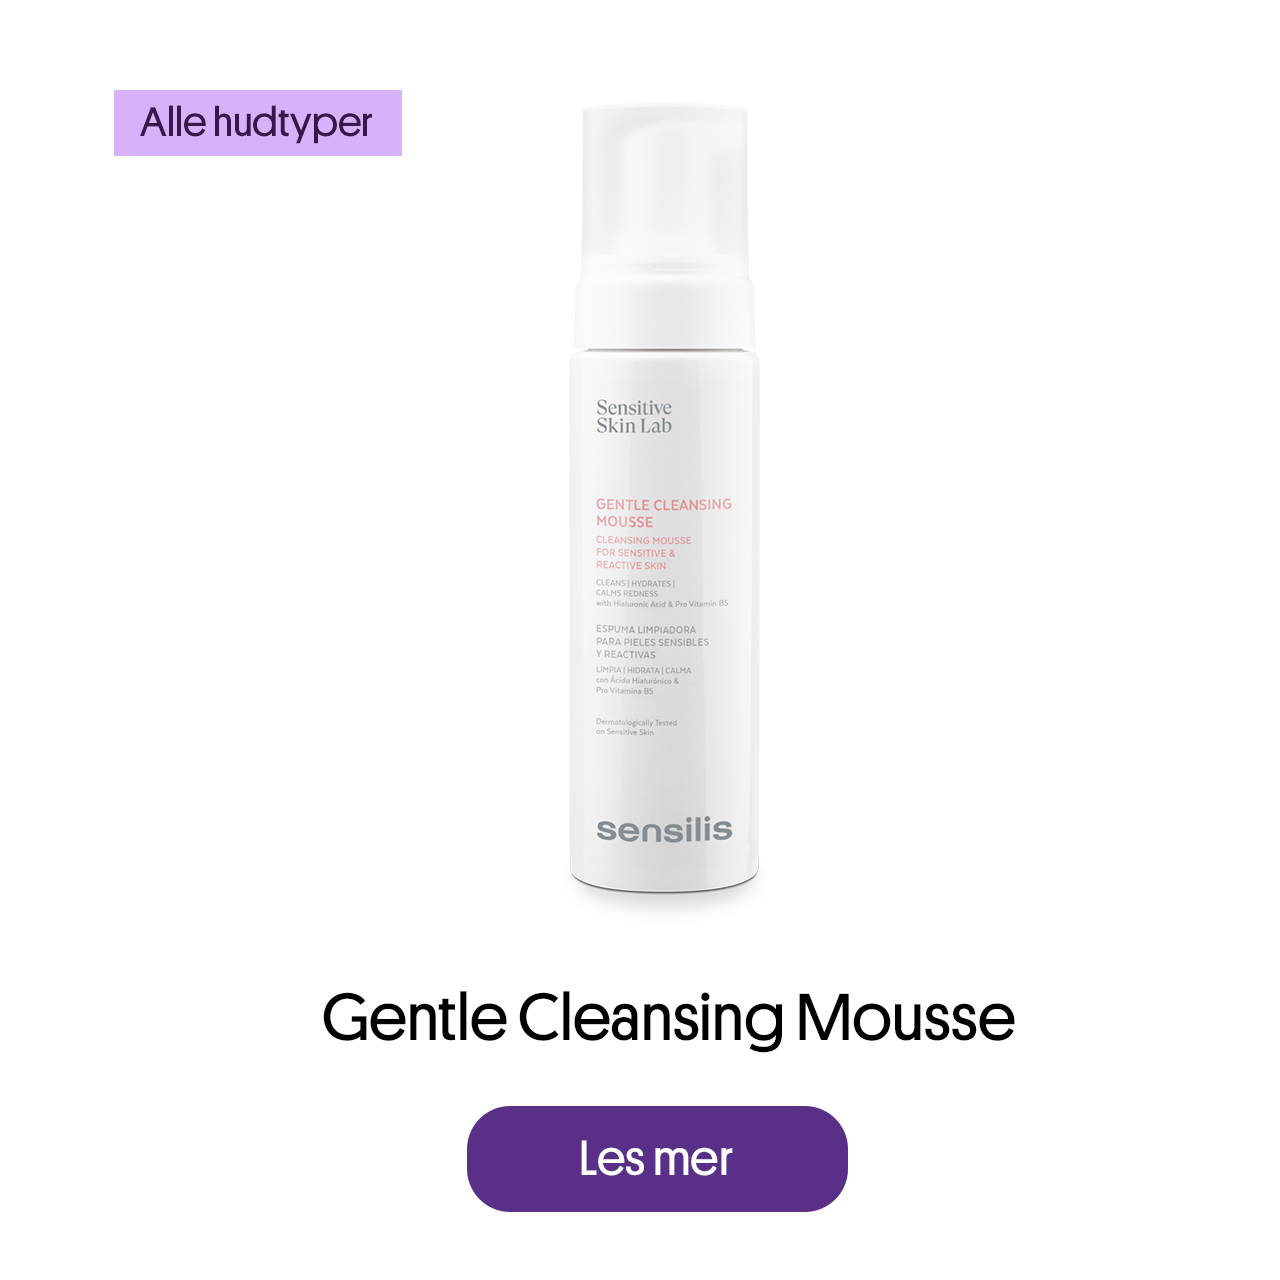 Cleansing mousse